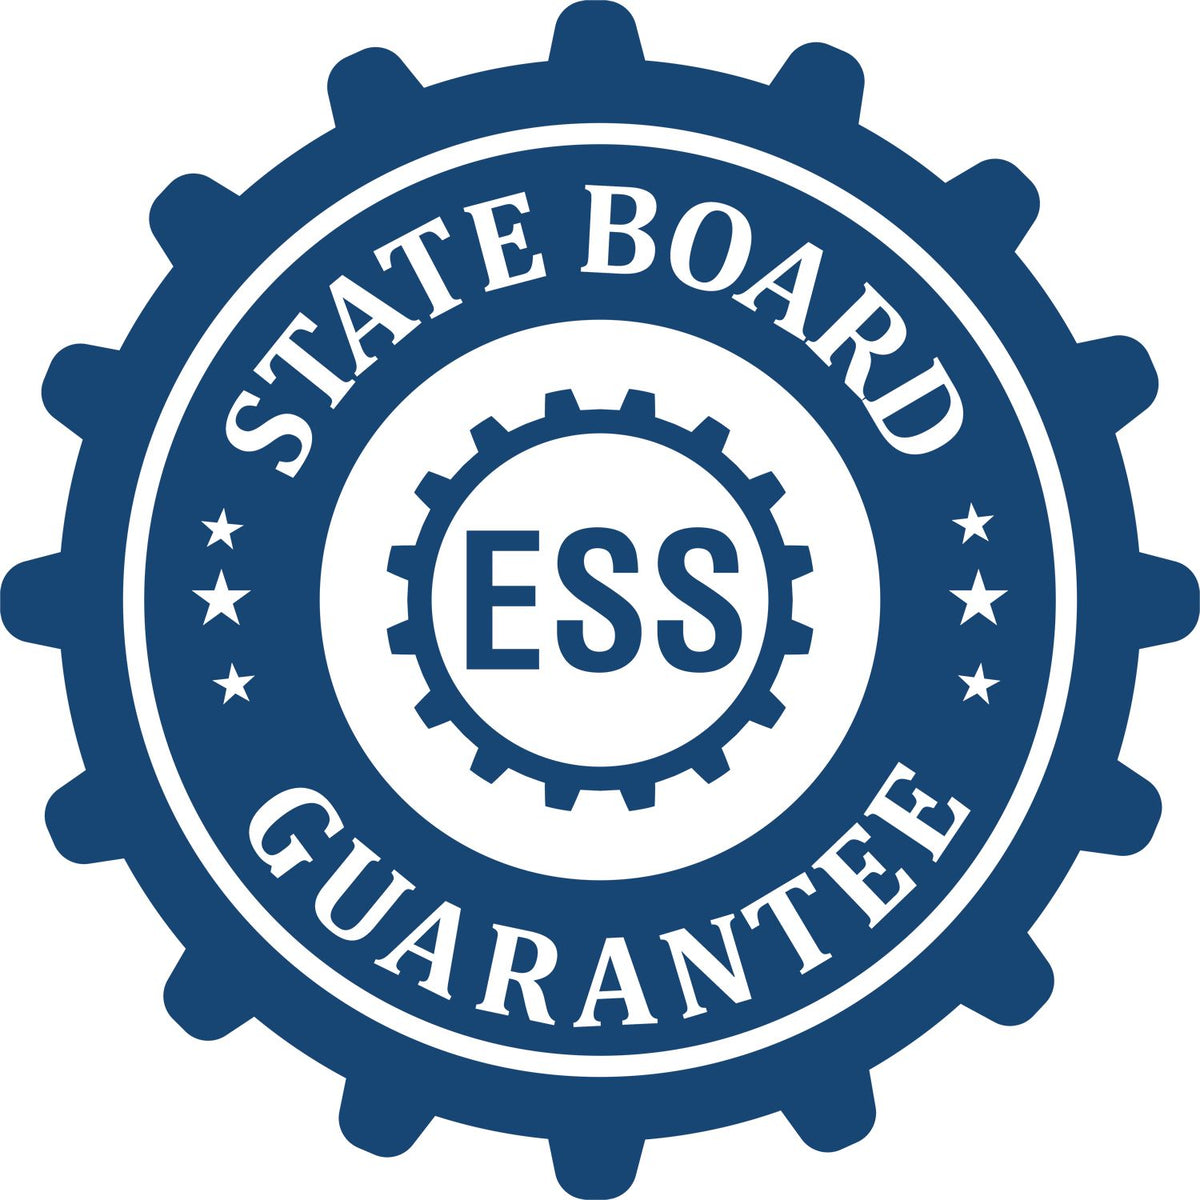 An emblem in a gear shape illustrating a state board guarantee for the Vermont Desk Architect Embossing Seal product.